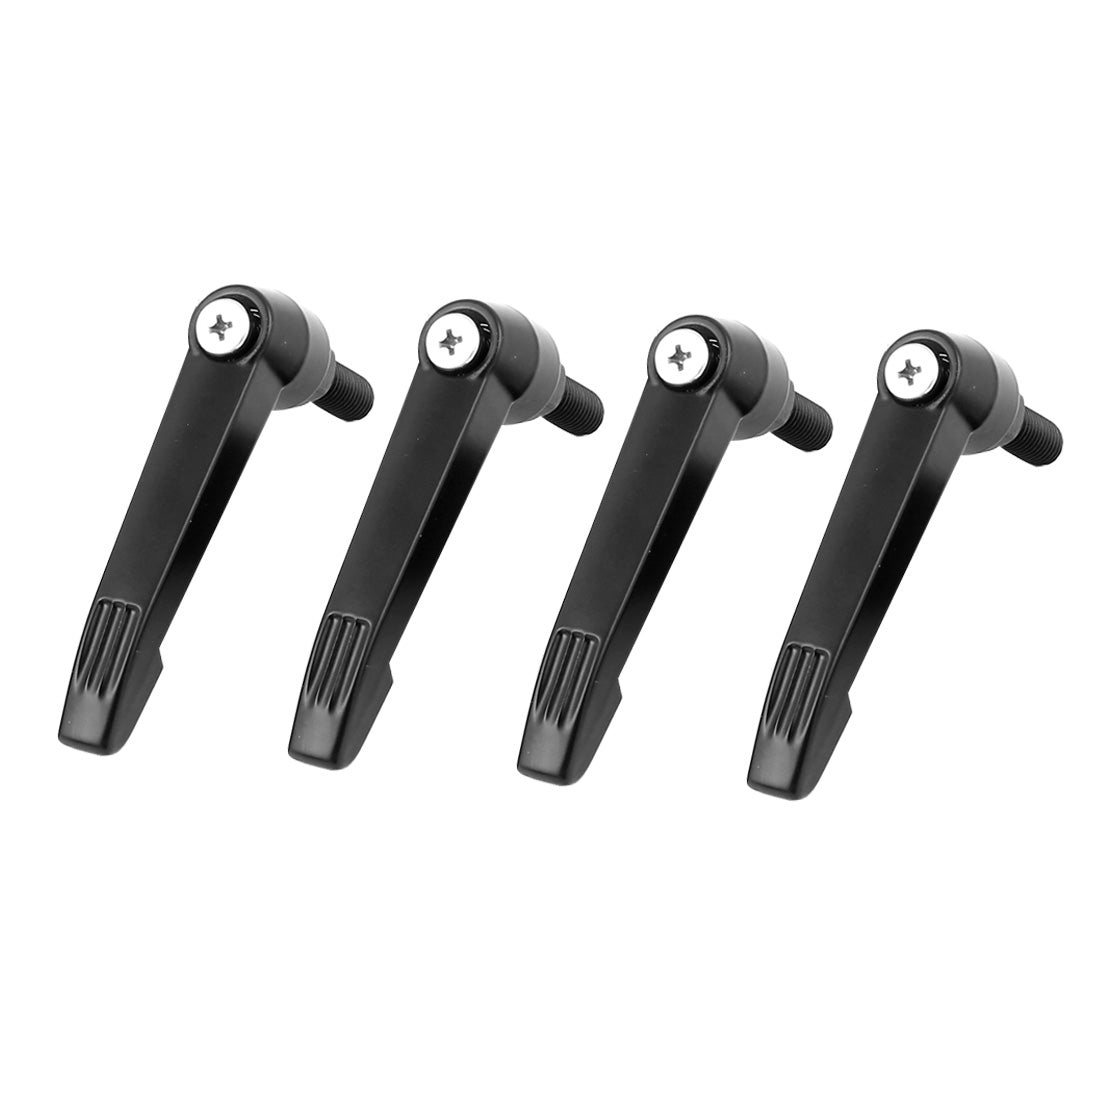 uxcell Uxcell 4pcs 10mm Thread Diameter Metal Clamping Lever Adjustable Knob Handles for Machinery